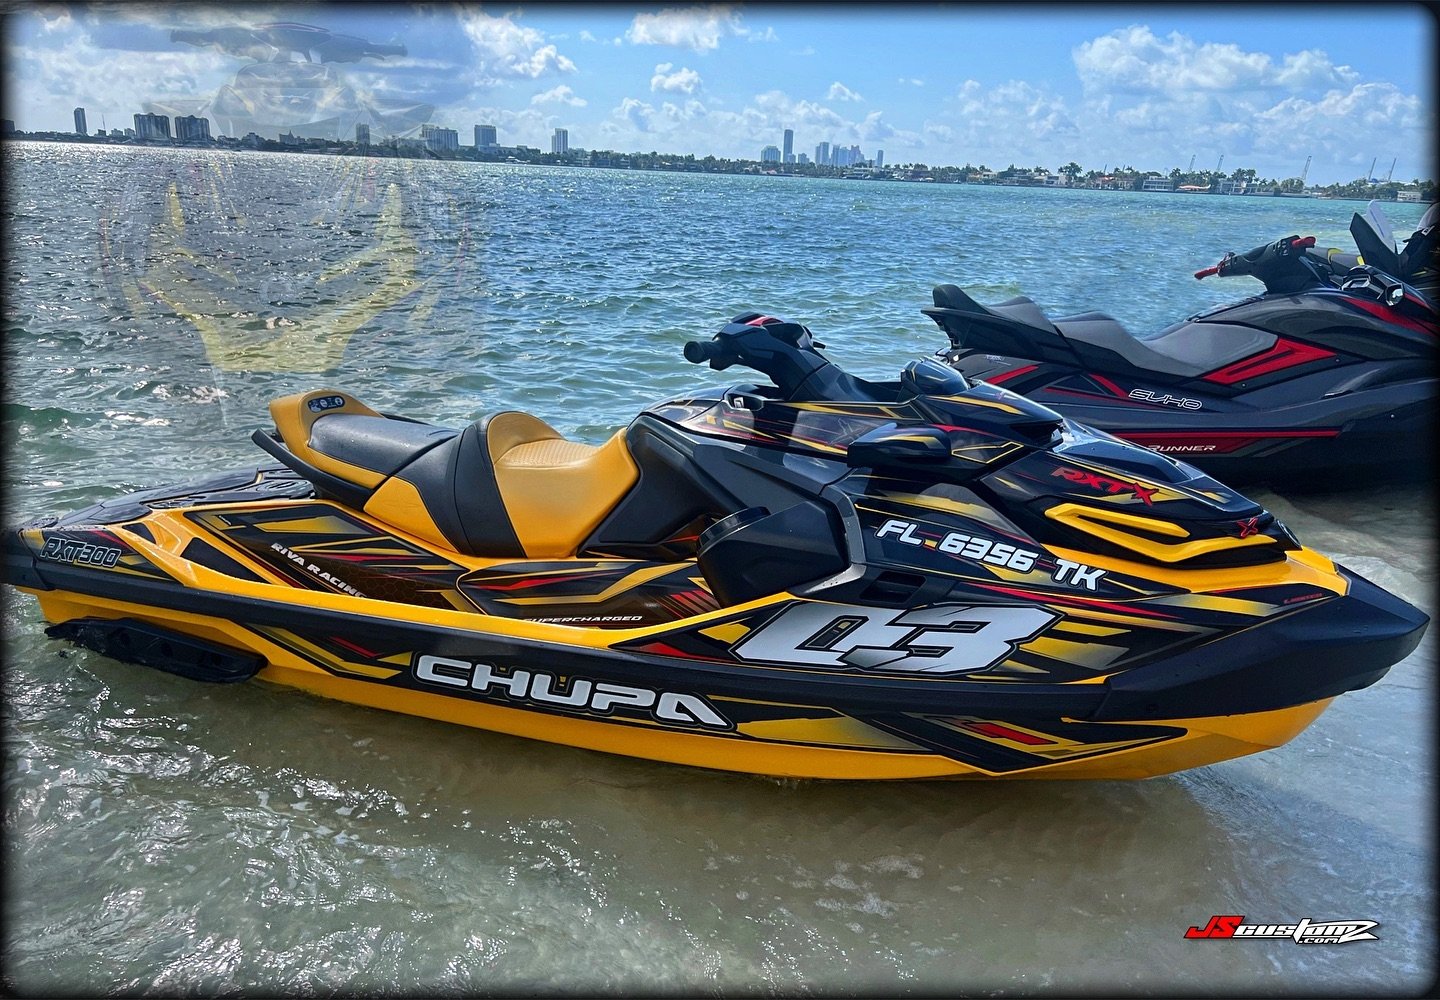 ▪️Escaping The Boredom Of Tuesdays▪️
Seadoo RXTX 18/Up JS5 Custom Graphic Kit▪️ One of our more generic designs▪️Get Your Now now JSCustomz.com▪️
▪️Get your Custom #GraphicKits for SEADOO YAMAHA &amp; KAWASAKI Models, Vassel Registrations▪️Custom Wor